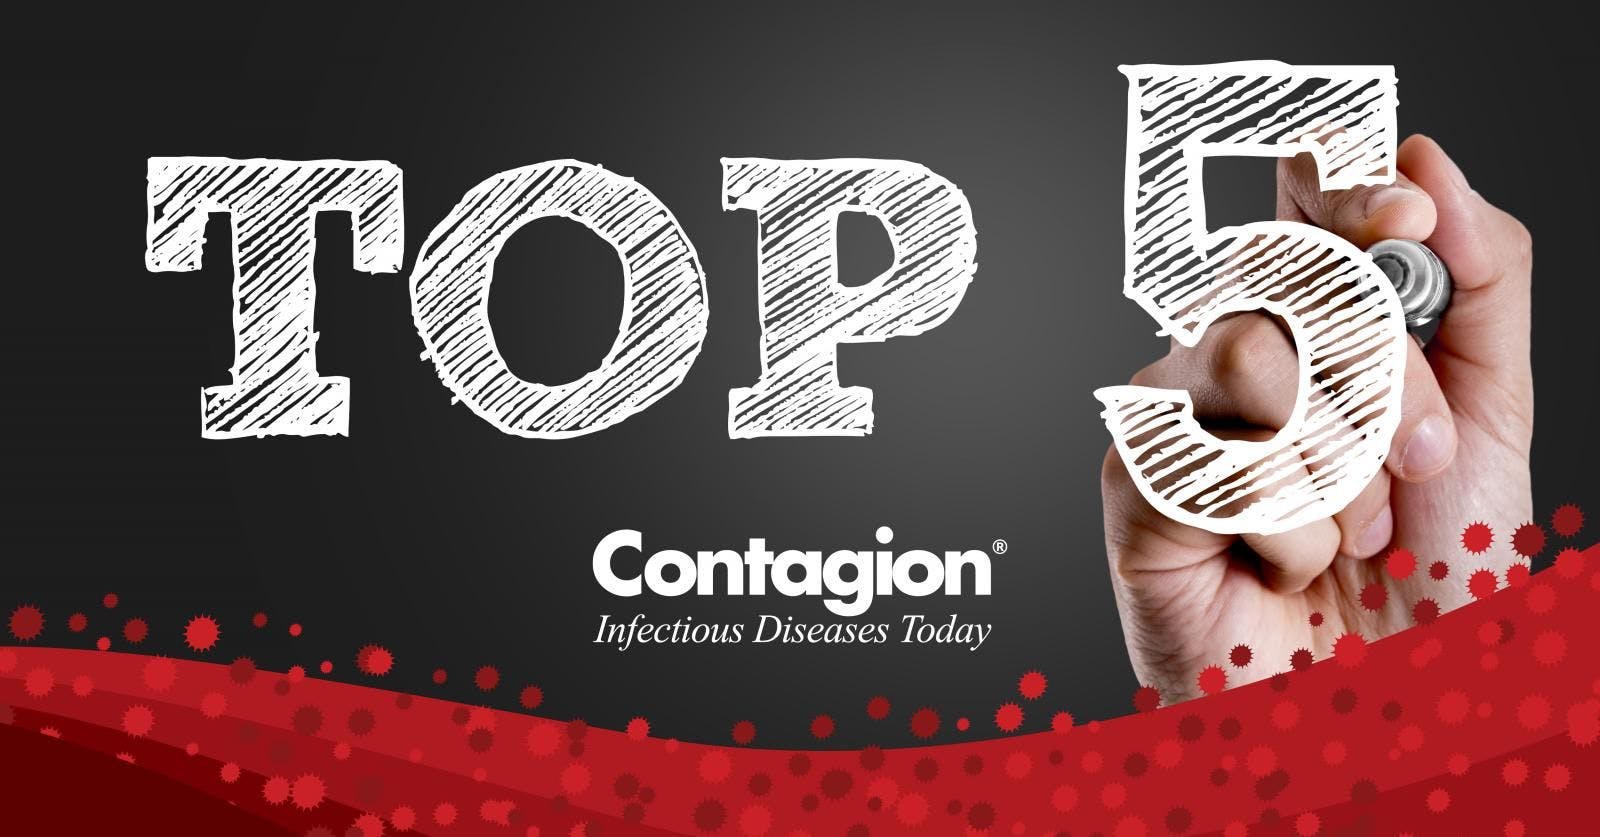 Top Infectious Disease News of the Week&mdash;March 8, 2020